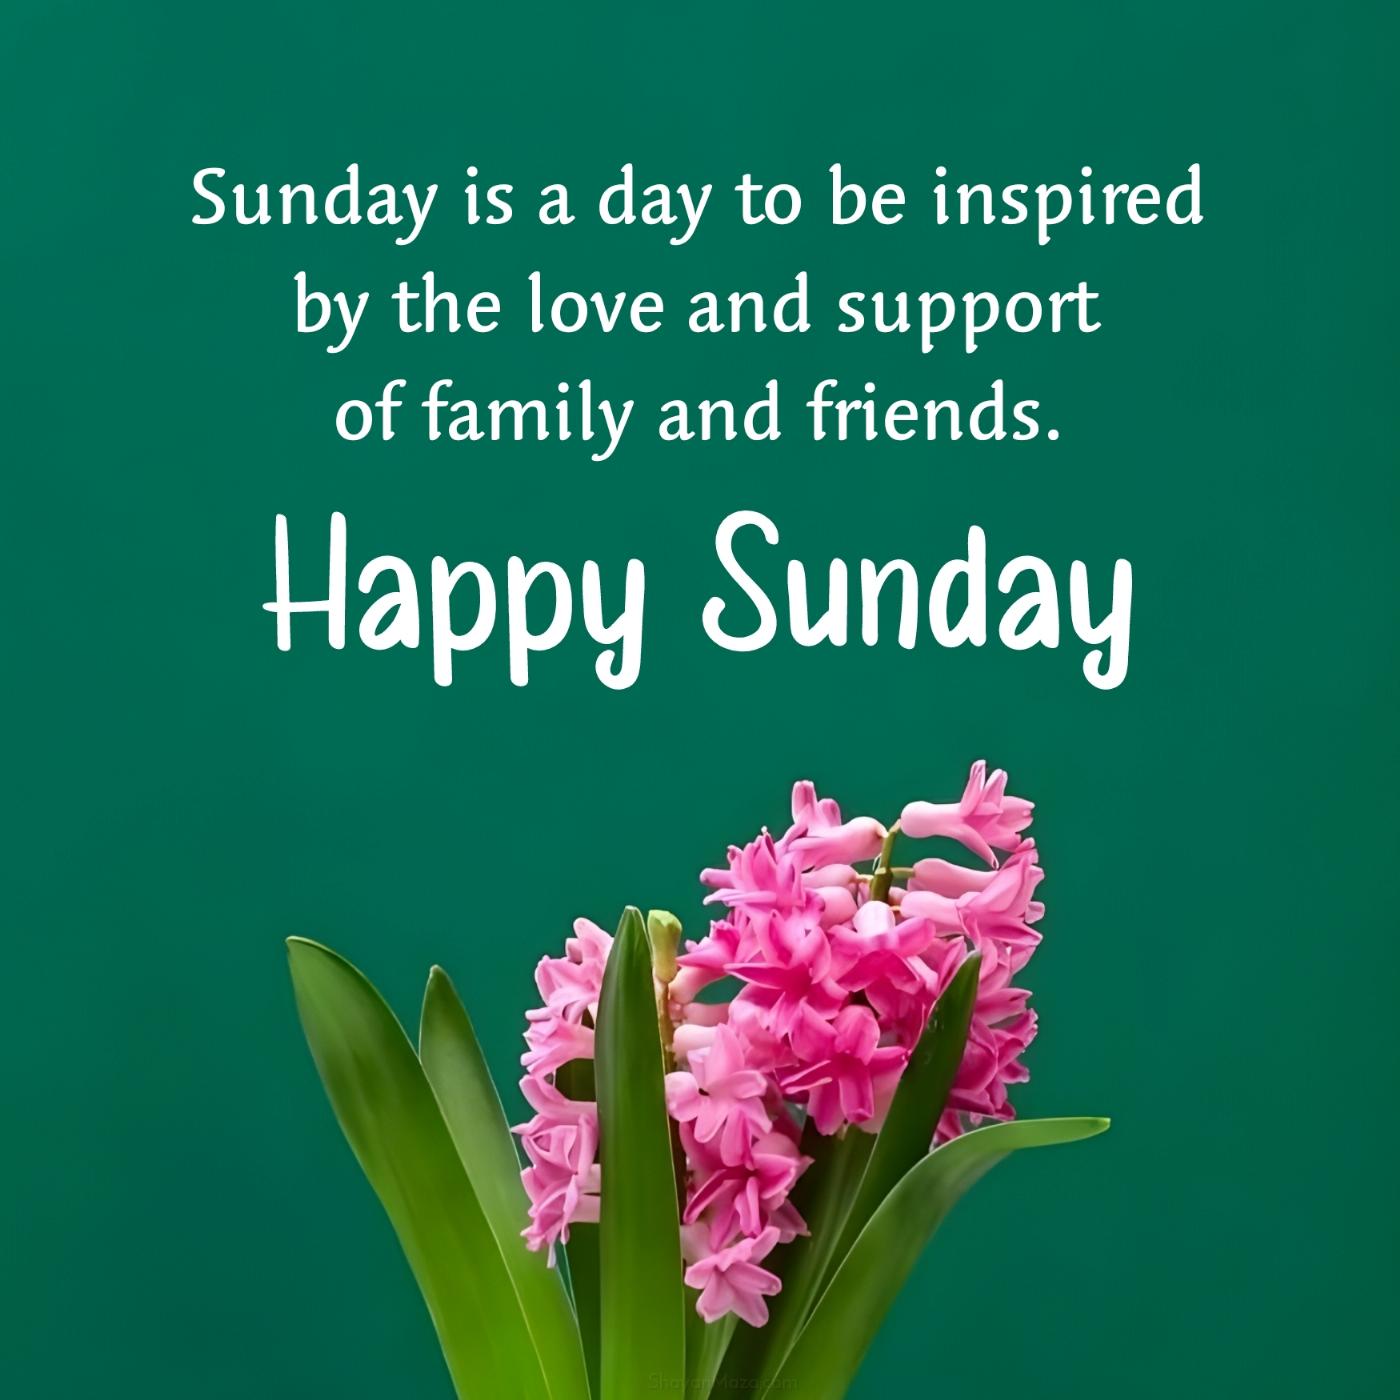 Sunday is a day to be inspired by the love and support of family